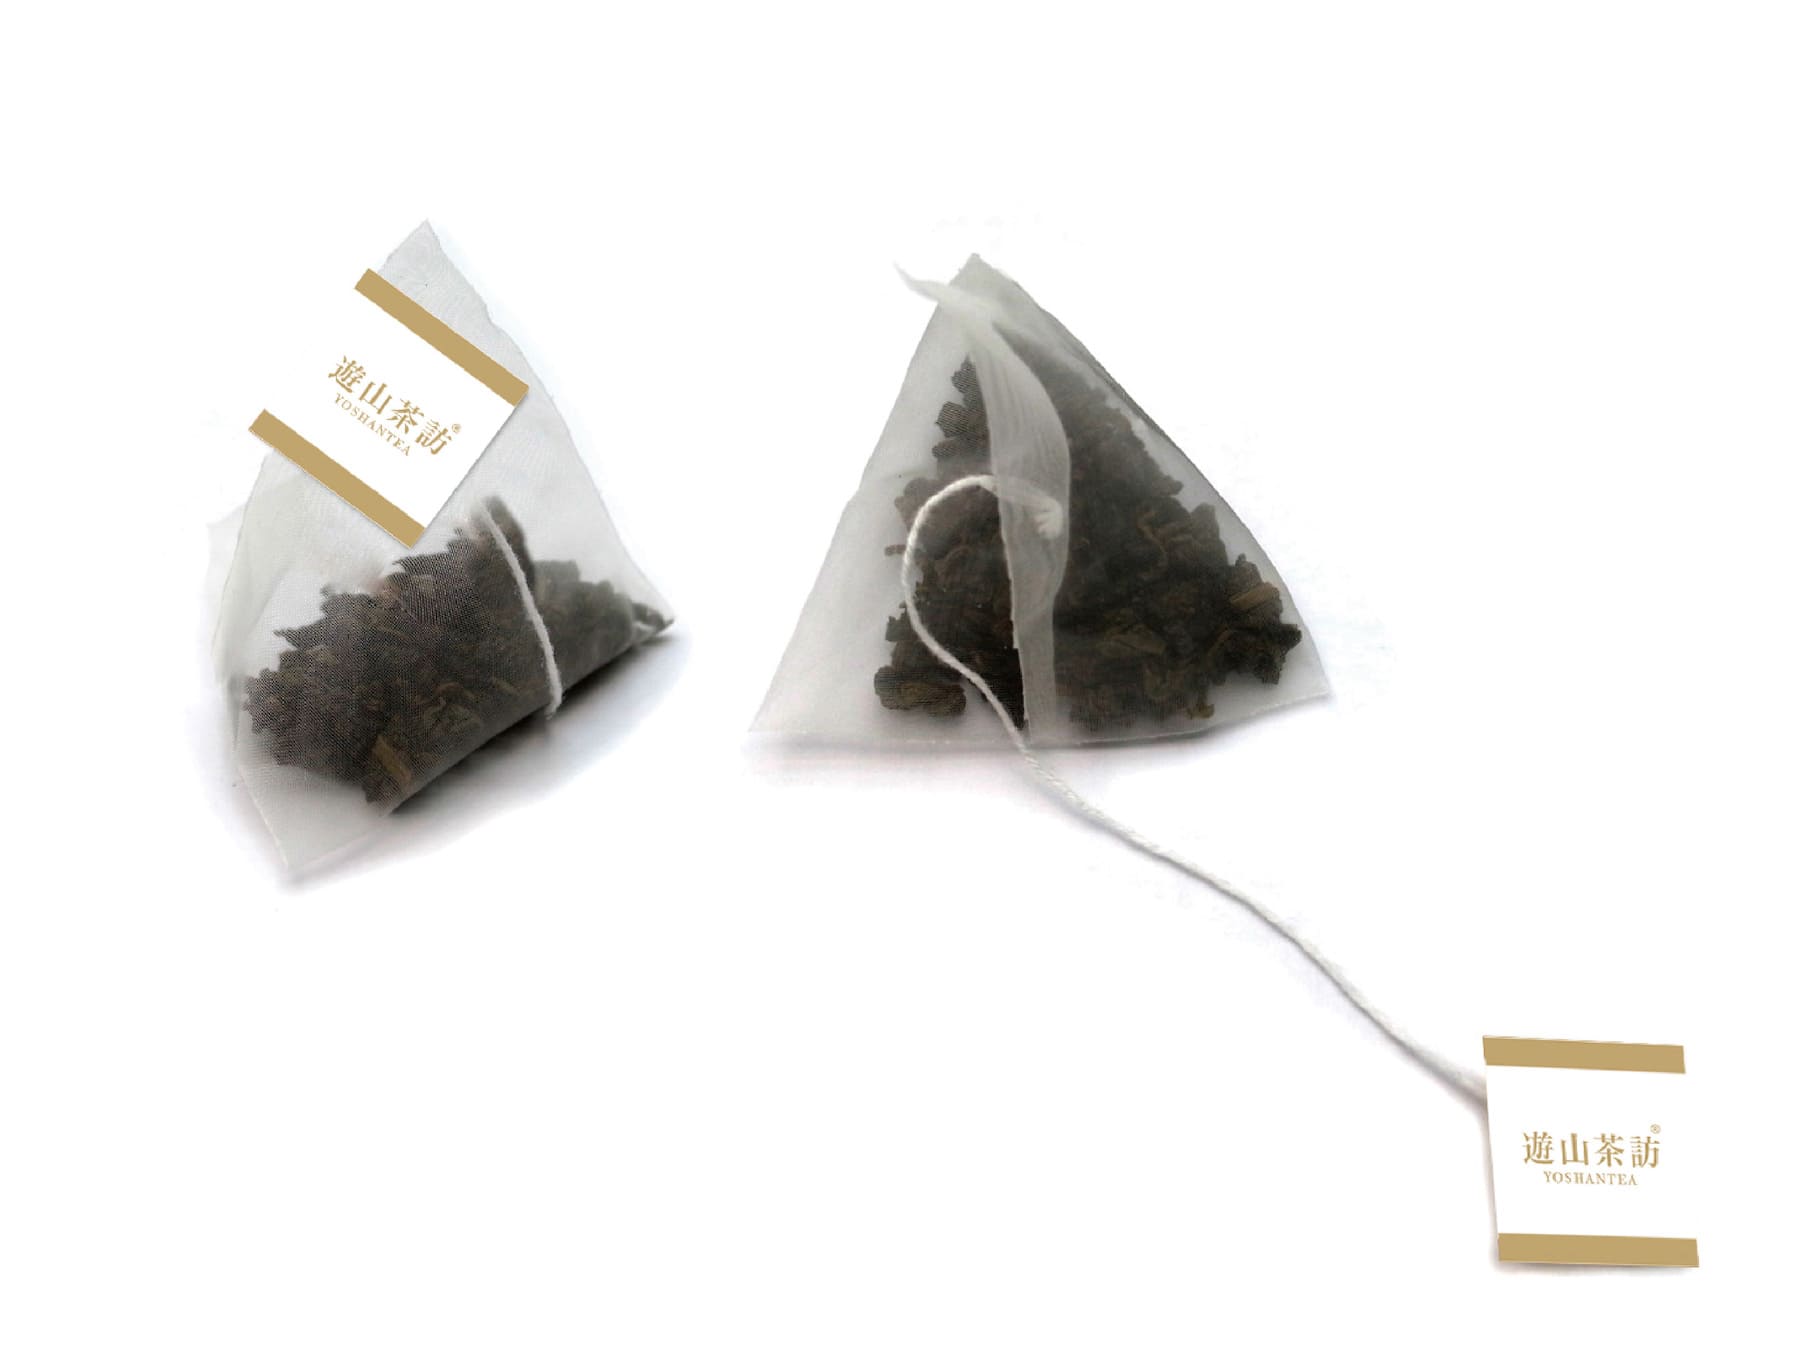 Triangular Tea Bags with Label